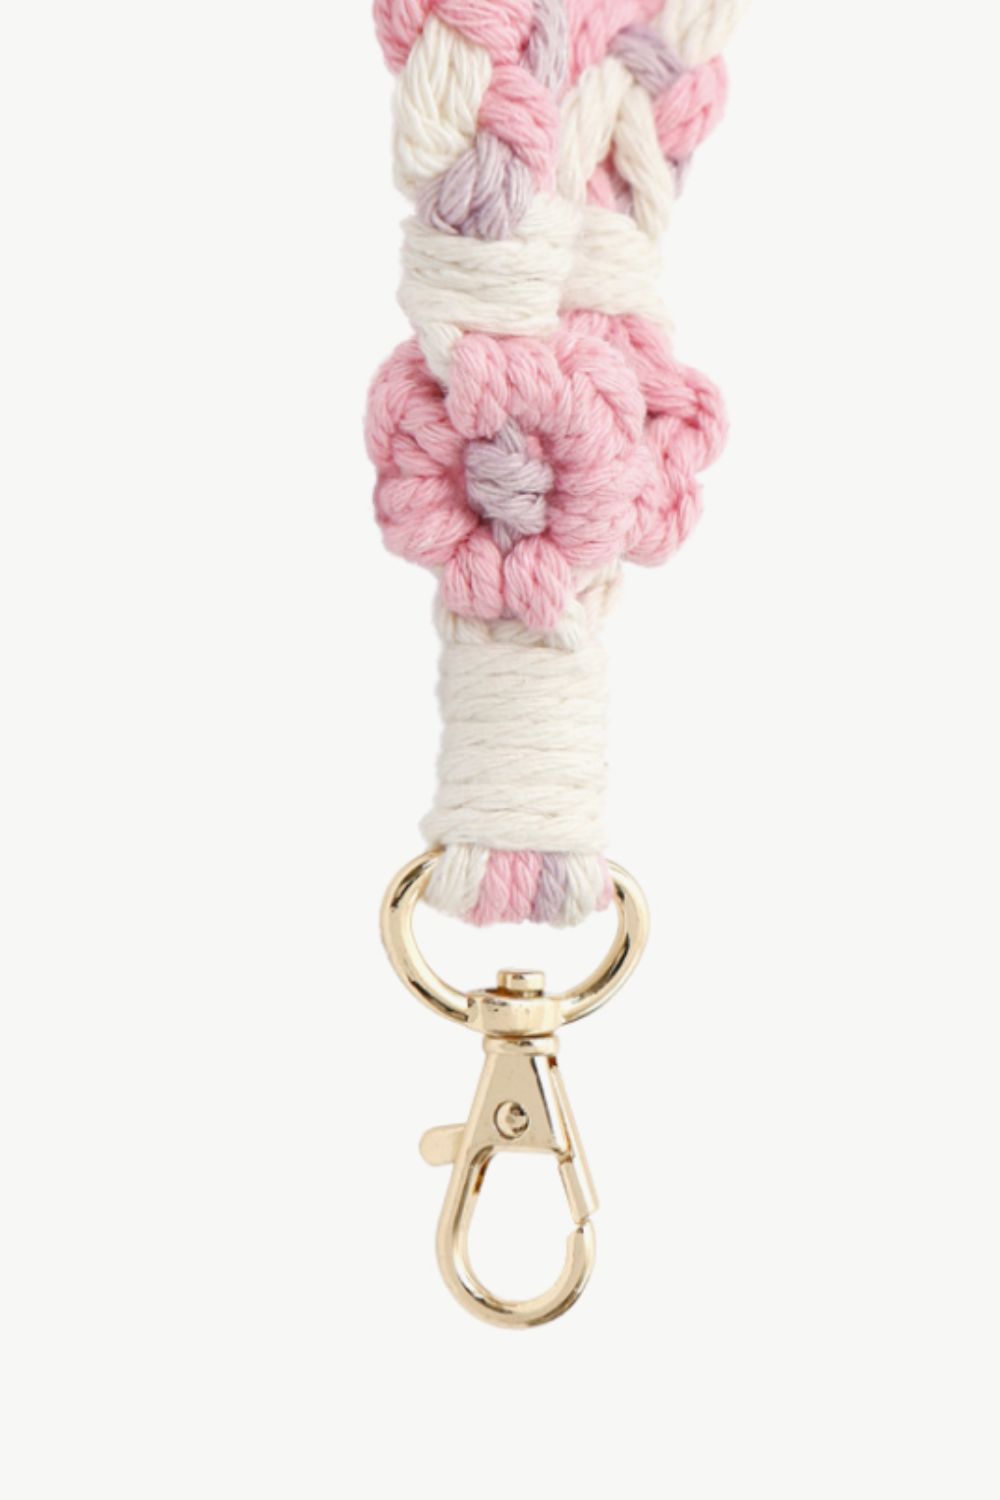 Trendsi Cupid Beauty Supplies Keychains Floral Braided Wristlet Key Chain